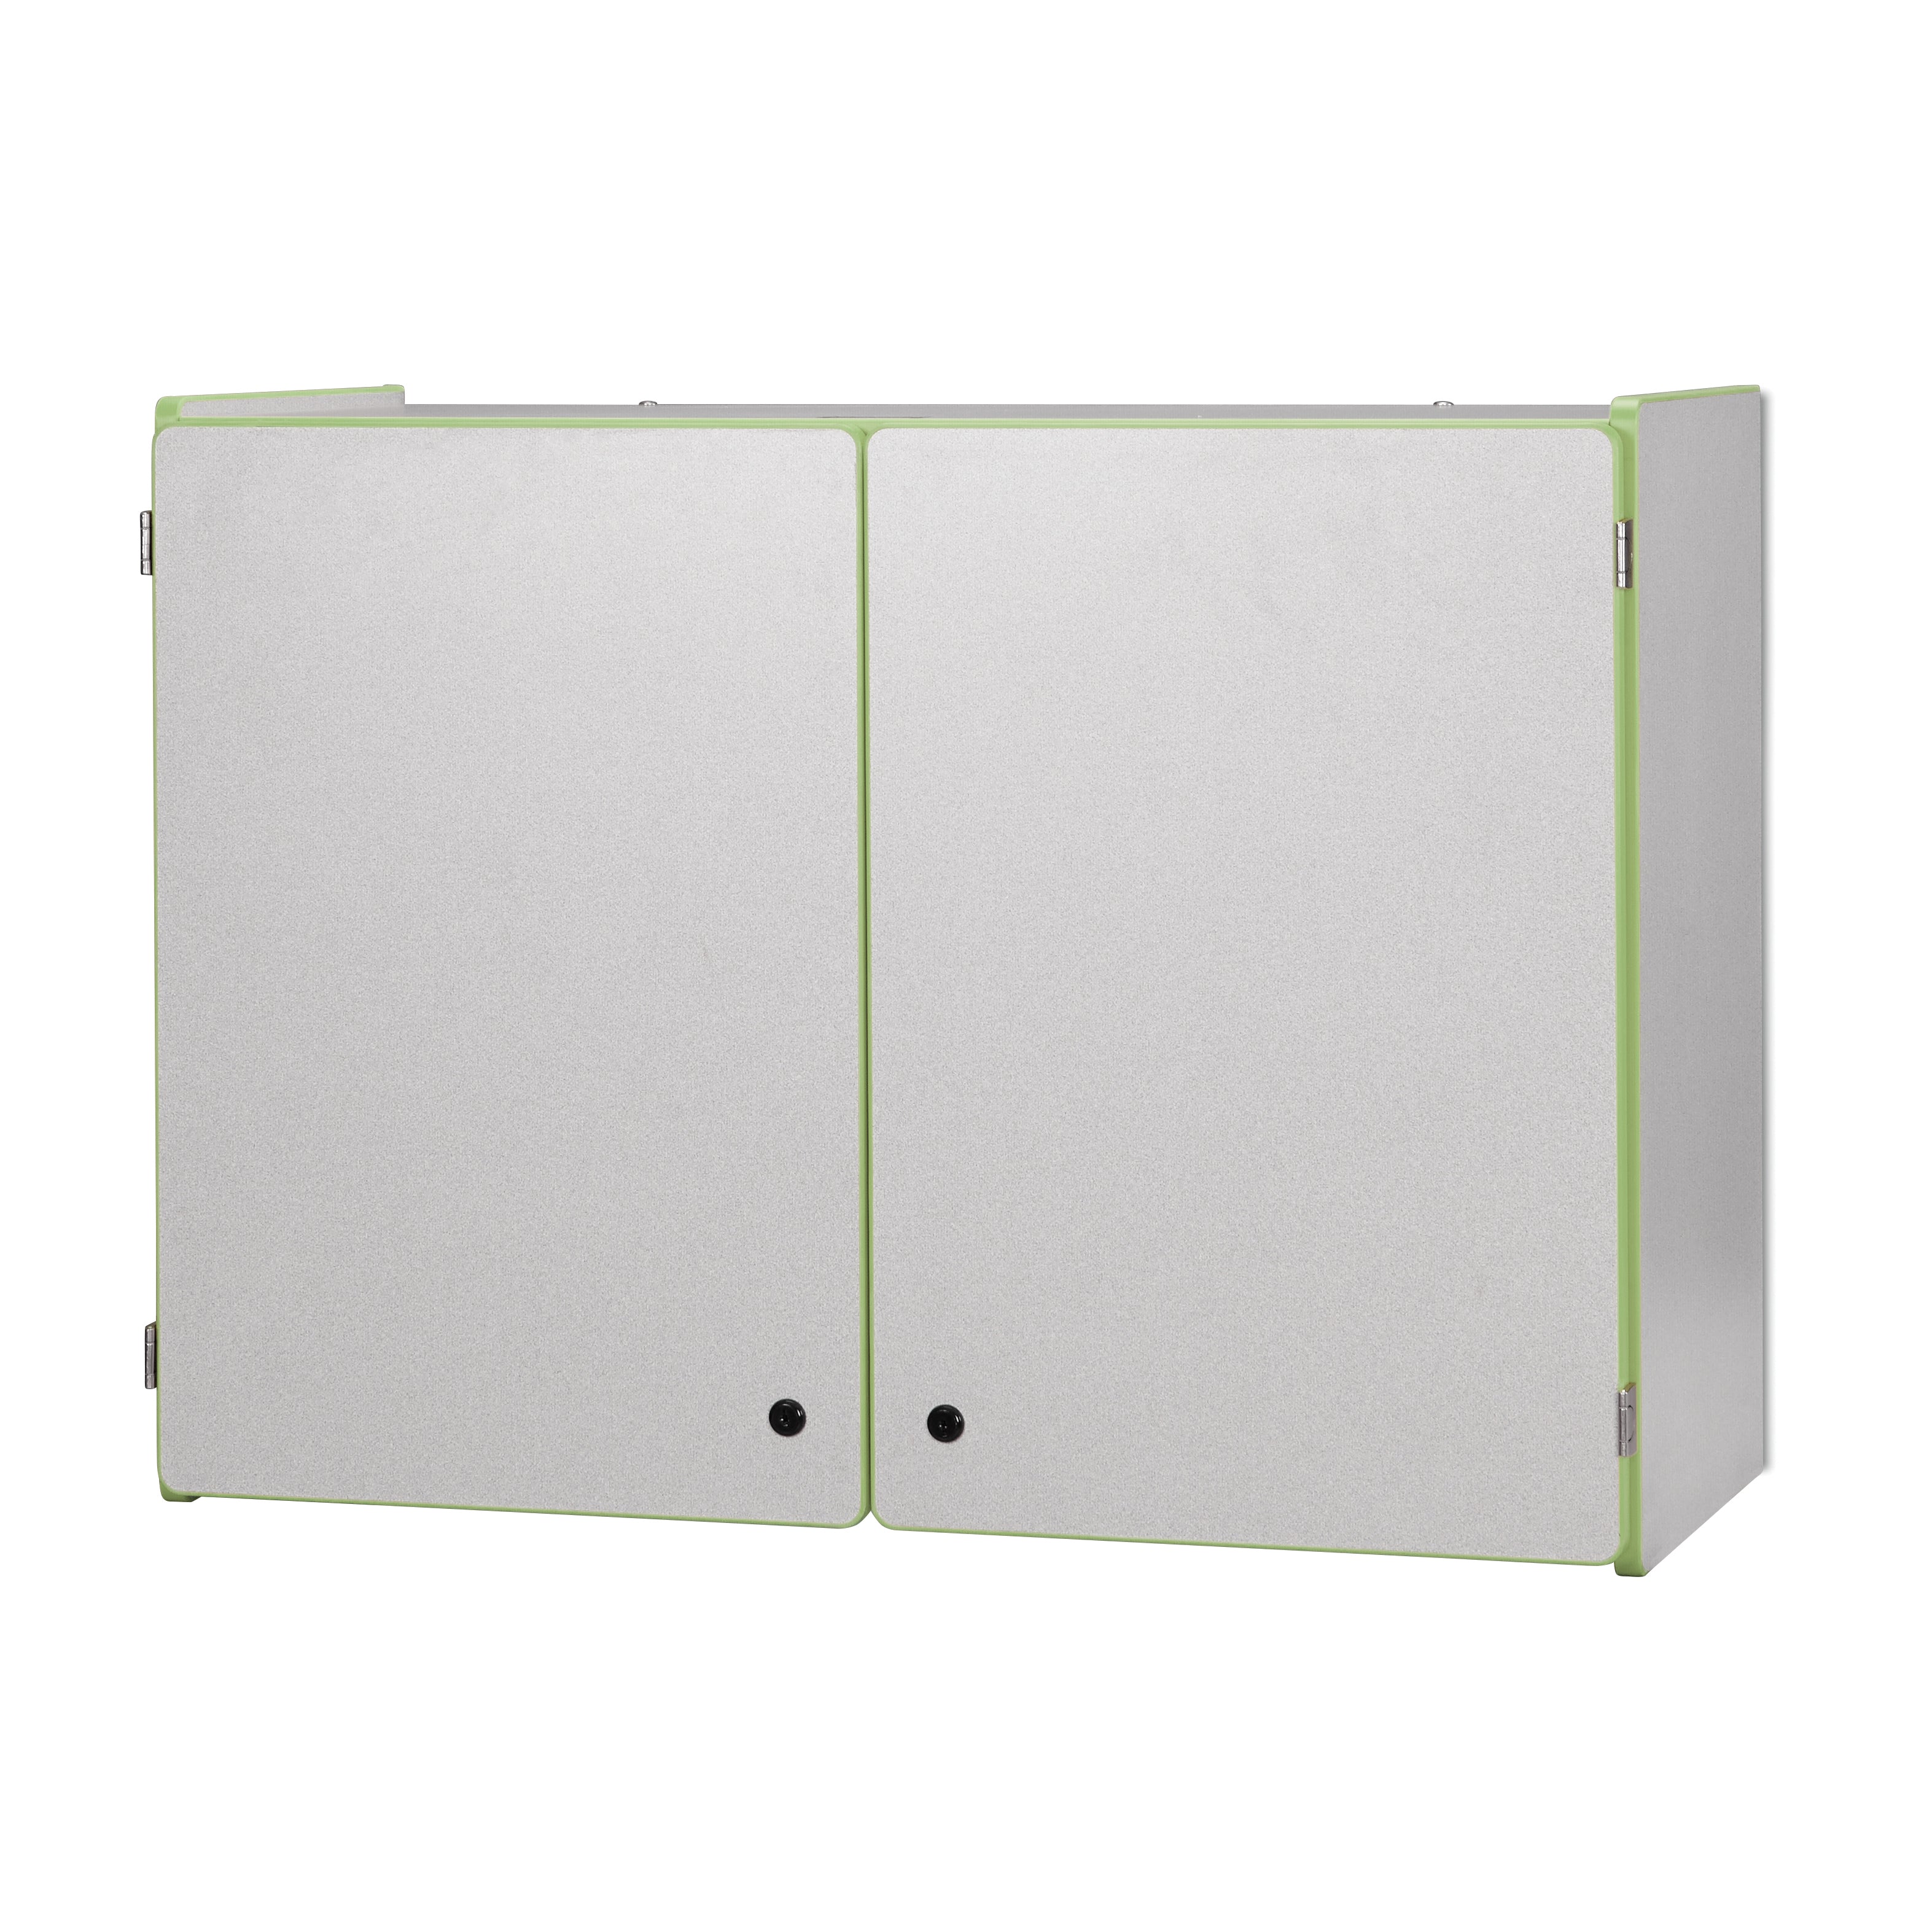 0945JC130, Rainbow Accents Lockable Wall Cabinet - Key Lime Green